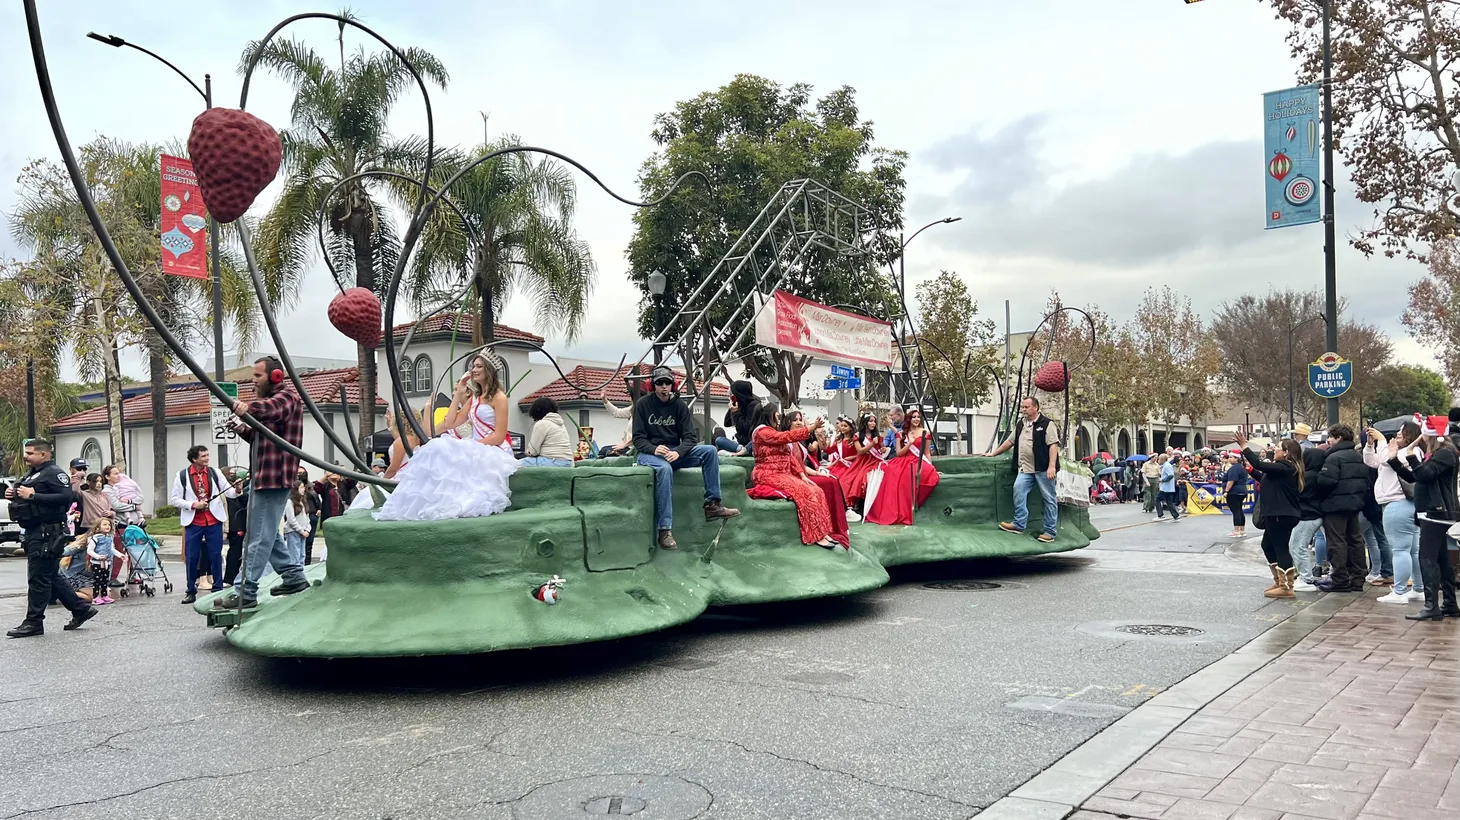 Downey’s in-progress float is seen in the city’s Christmas parade. Riding on it: young women crowned queens and princesses in a local fundraising pageant. The finished float will appear on January 2, 2023 during the Pasadena Tournament of Roses parade.